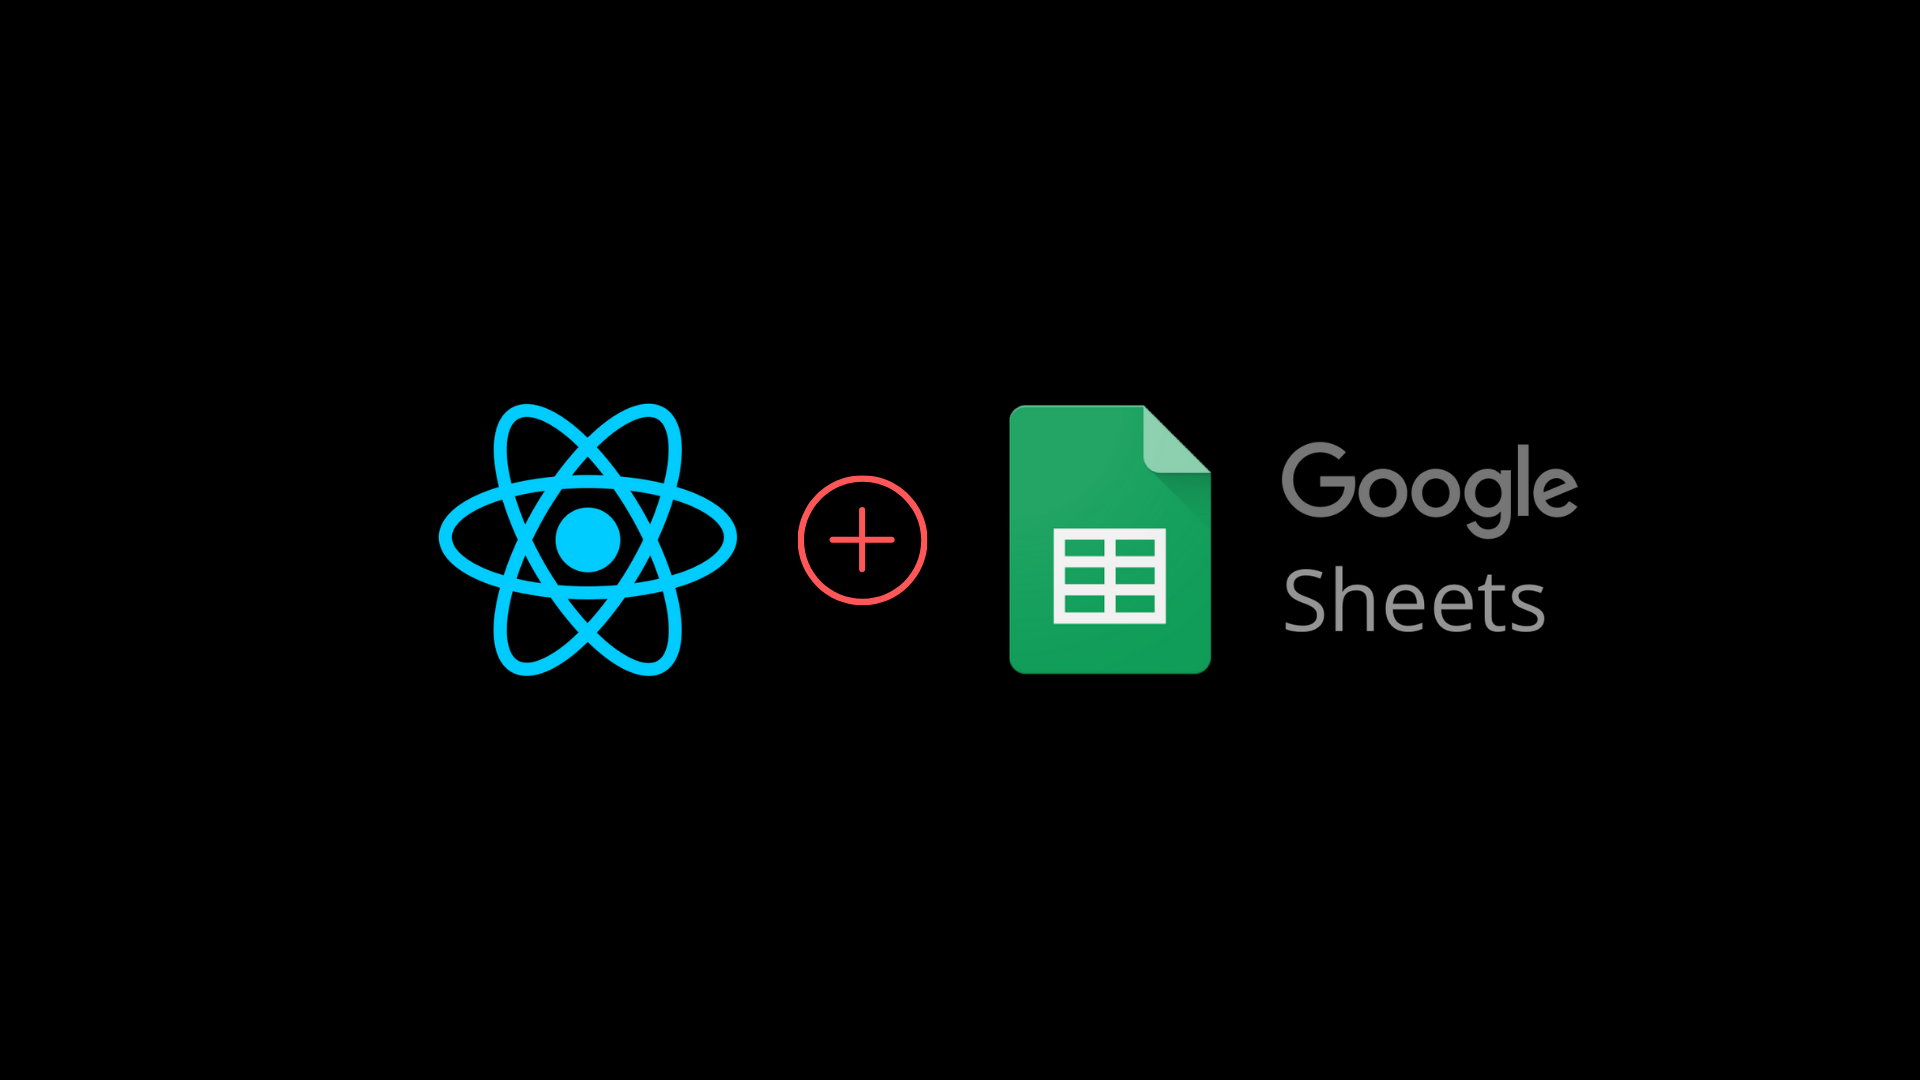 How to Turn Google Sheets into a REST API and Use it with a React Application